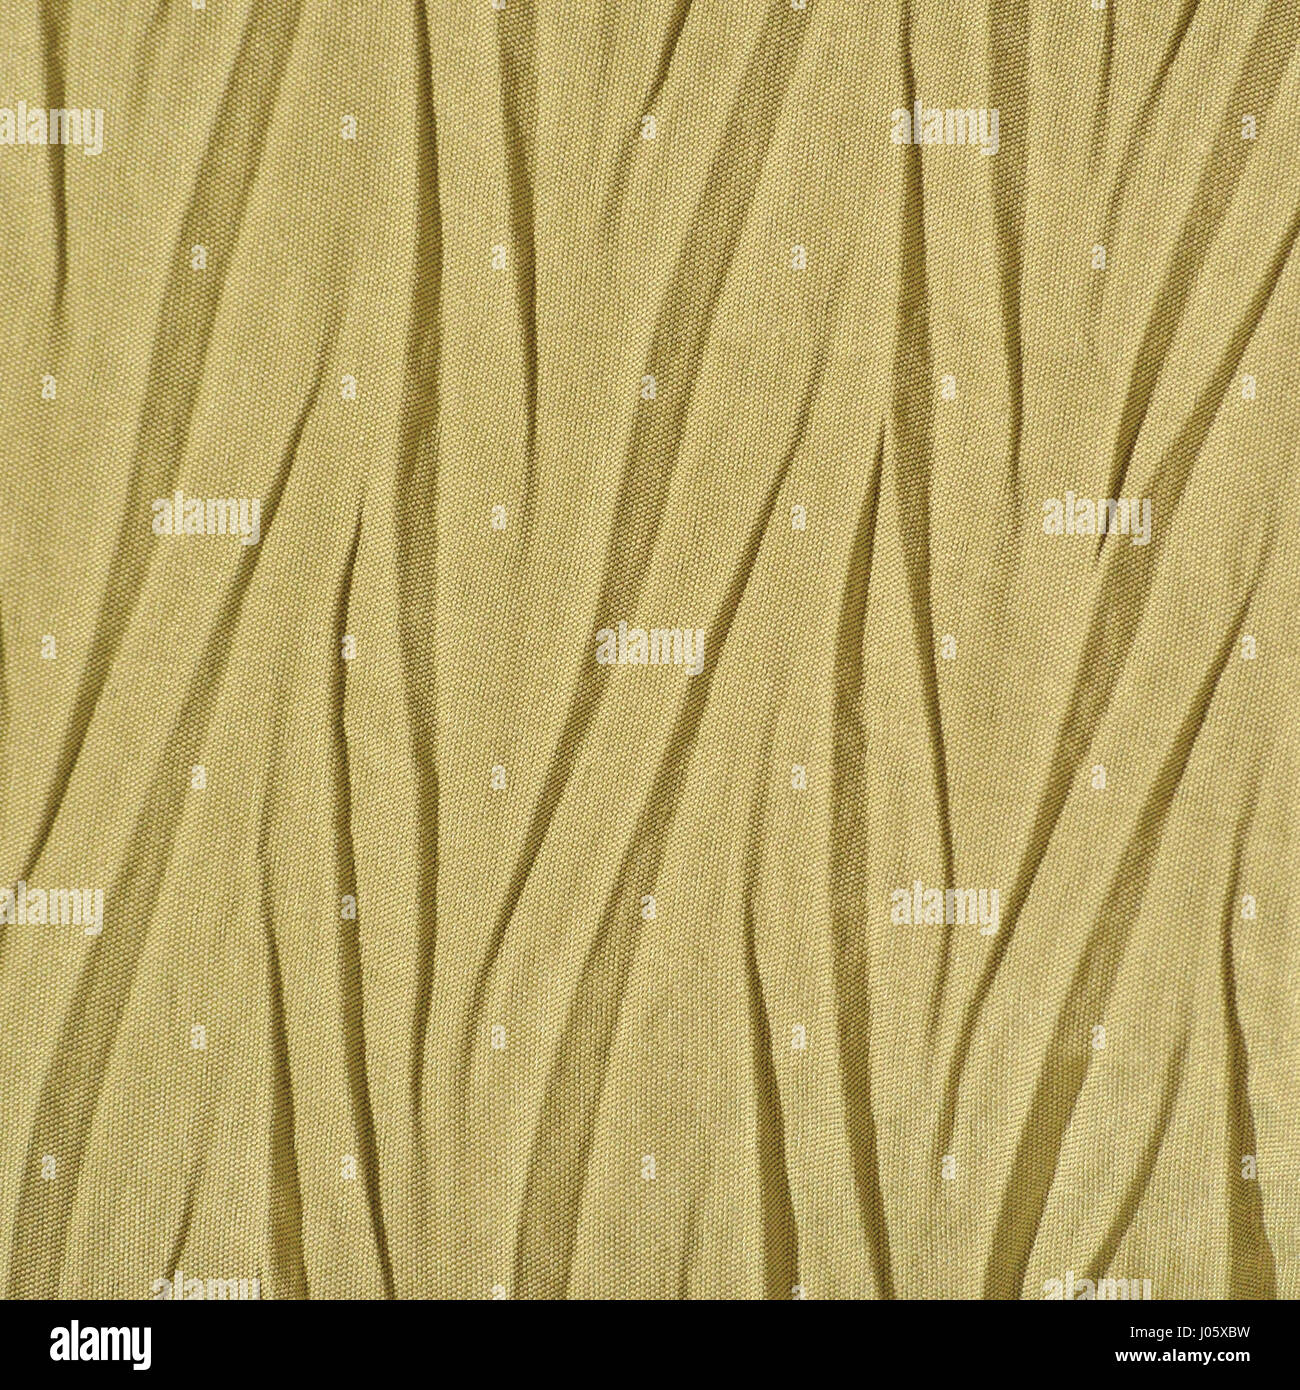 Yellow Golden Crumpled Synthetic textile, Creased Polyester Fabric Detail, Vertical Decorative Wrinkled Texture Pattern, Bright Large Detailed Texture Stock Photo